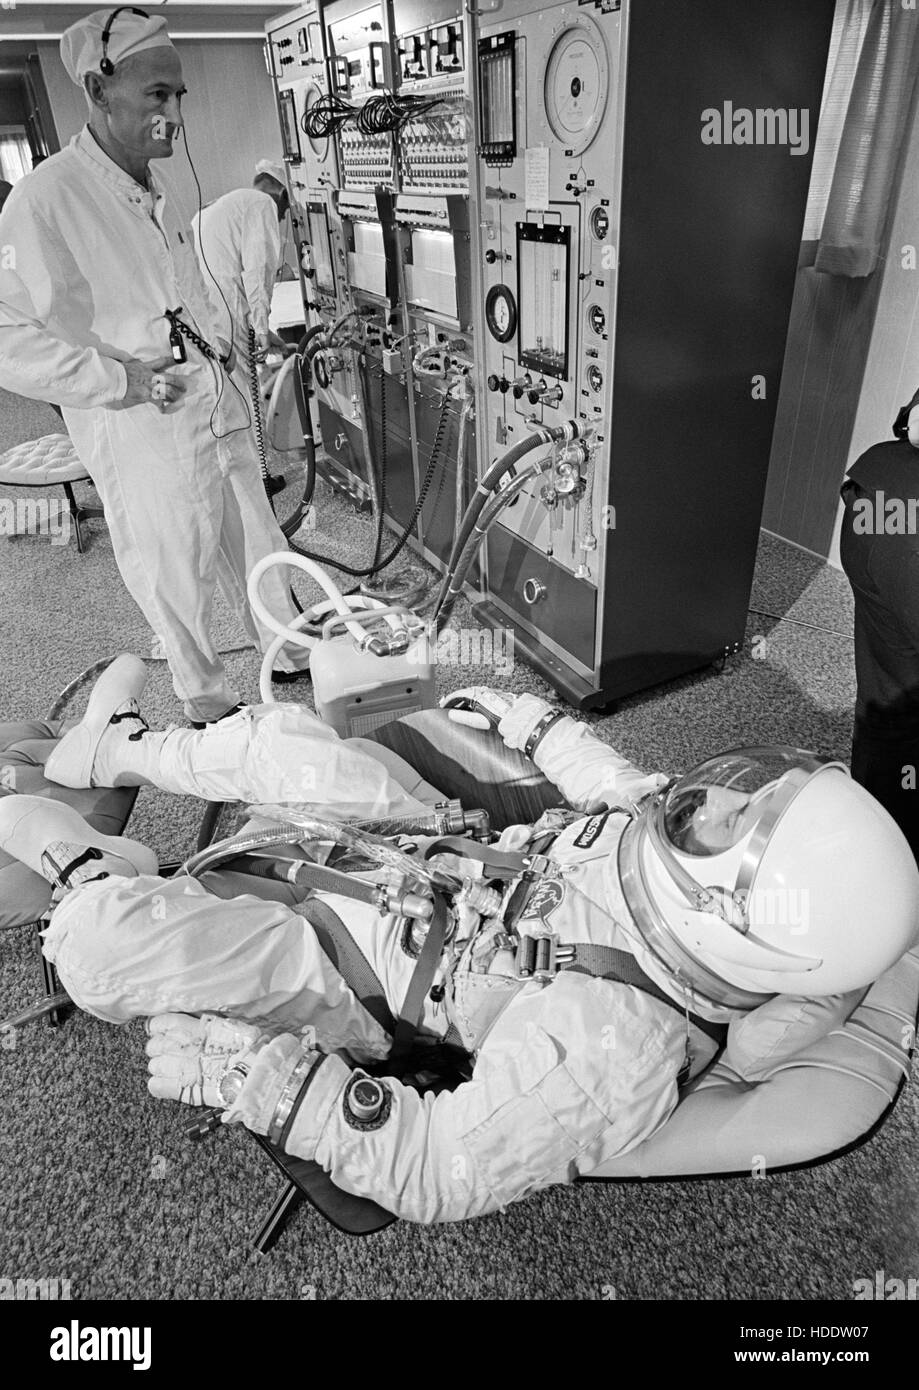 NASA Gemini-Titan 3 prime crew astronaut Gus Grissom suits up for pre-flight checks prior to a Gemini-3 spacecraft test flight simulation at the Cape Canaveral Air Force Station March 18, 1965 in Cape Canaveral, Florida. Stock Photo